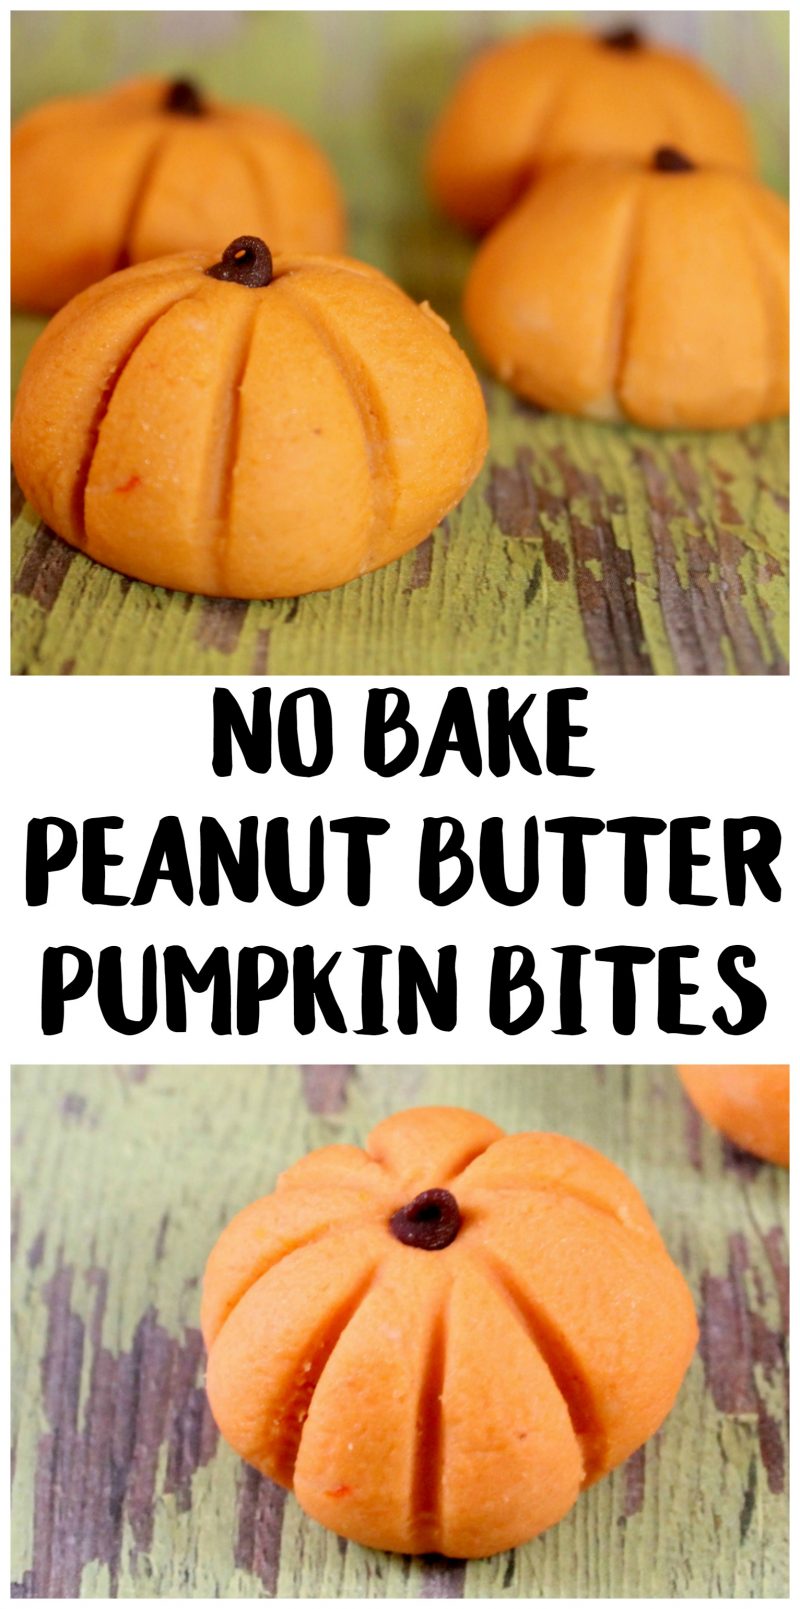 If you’re looking for delicious pumpkin themed recipes & ideas this Fall and Halloween, you have to try these homemade NO BAKE peanut butter pumpkin bites! They’re like peanut butter cookies and pumpkins put together but without the carving and with all the dessert!